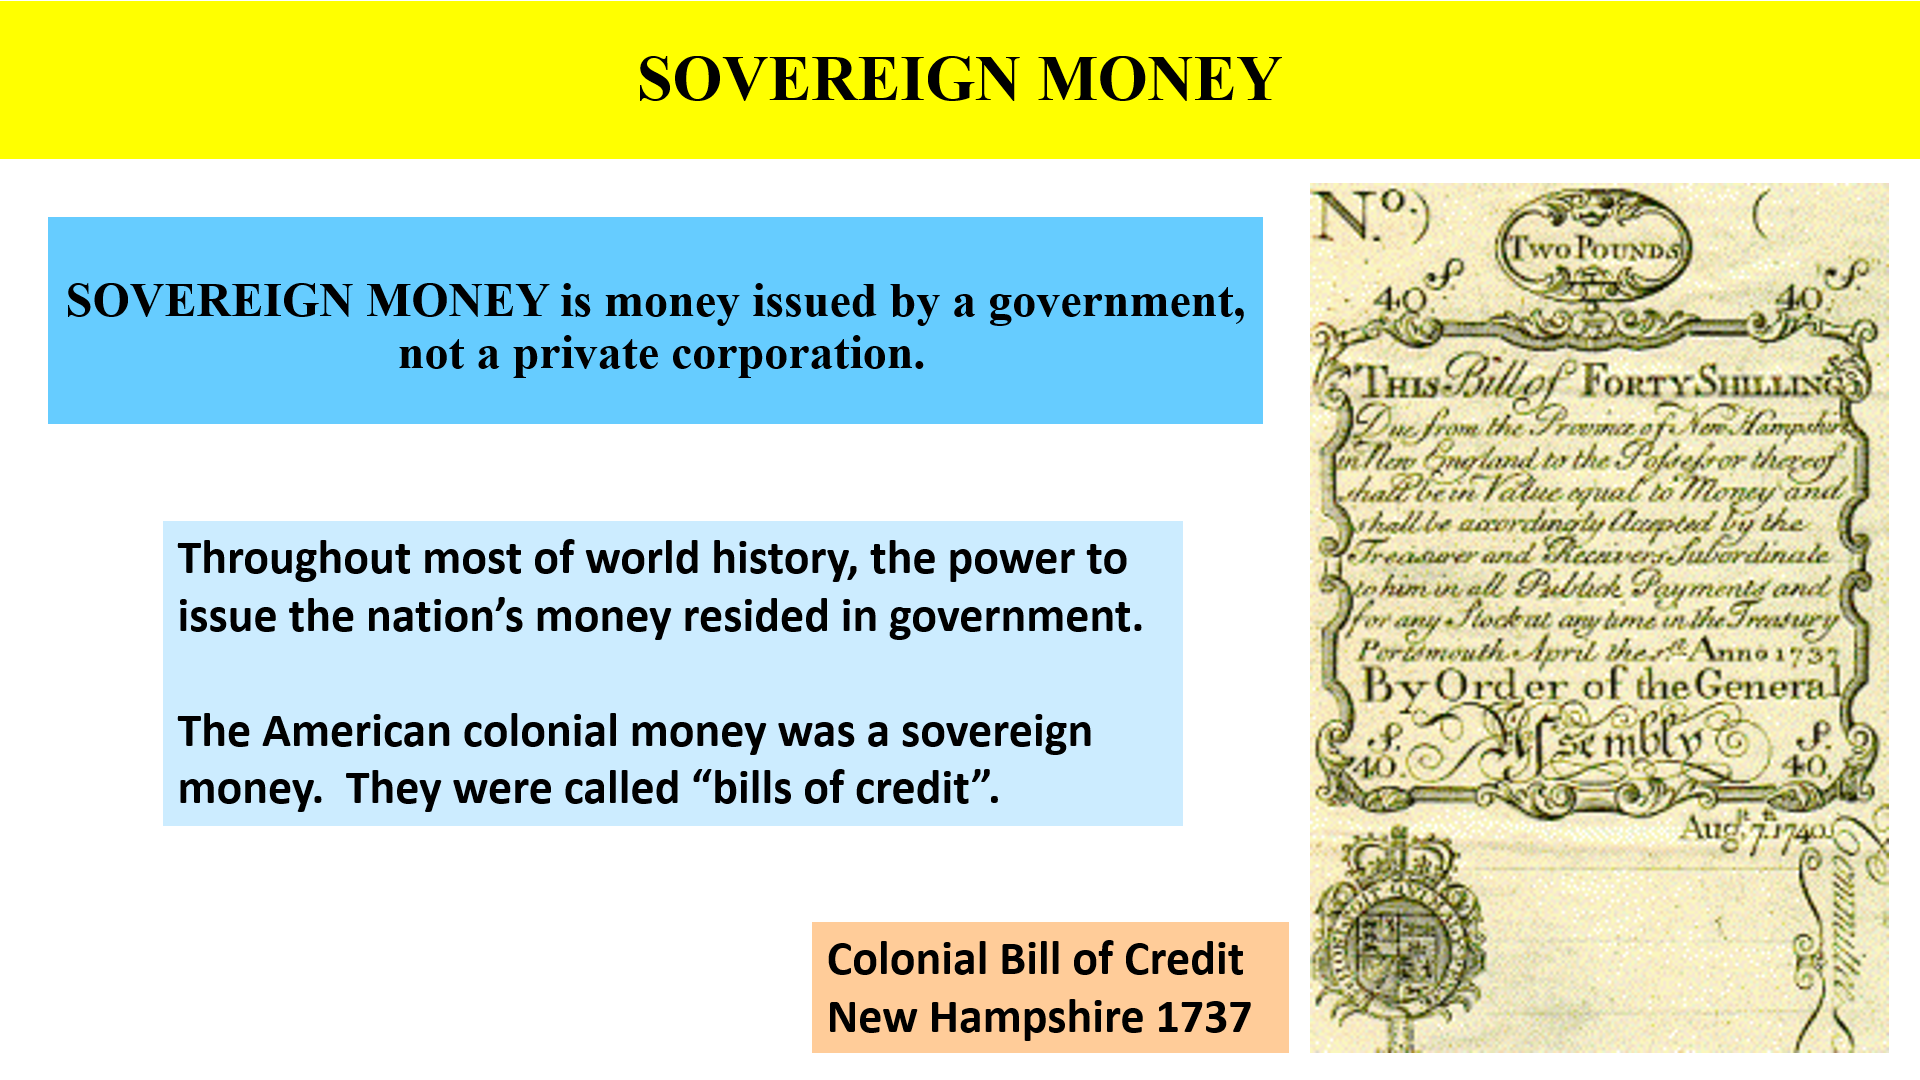 Sovereign money is issued by government